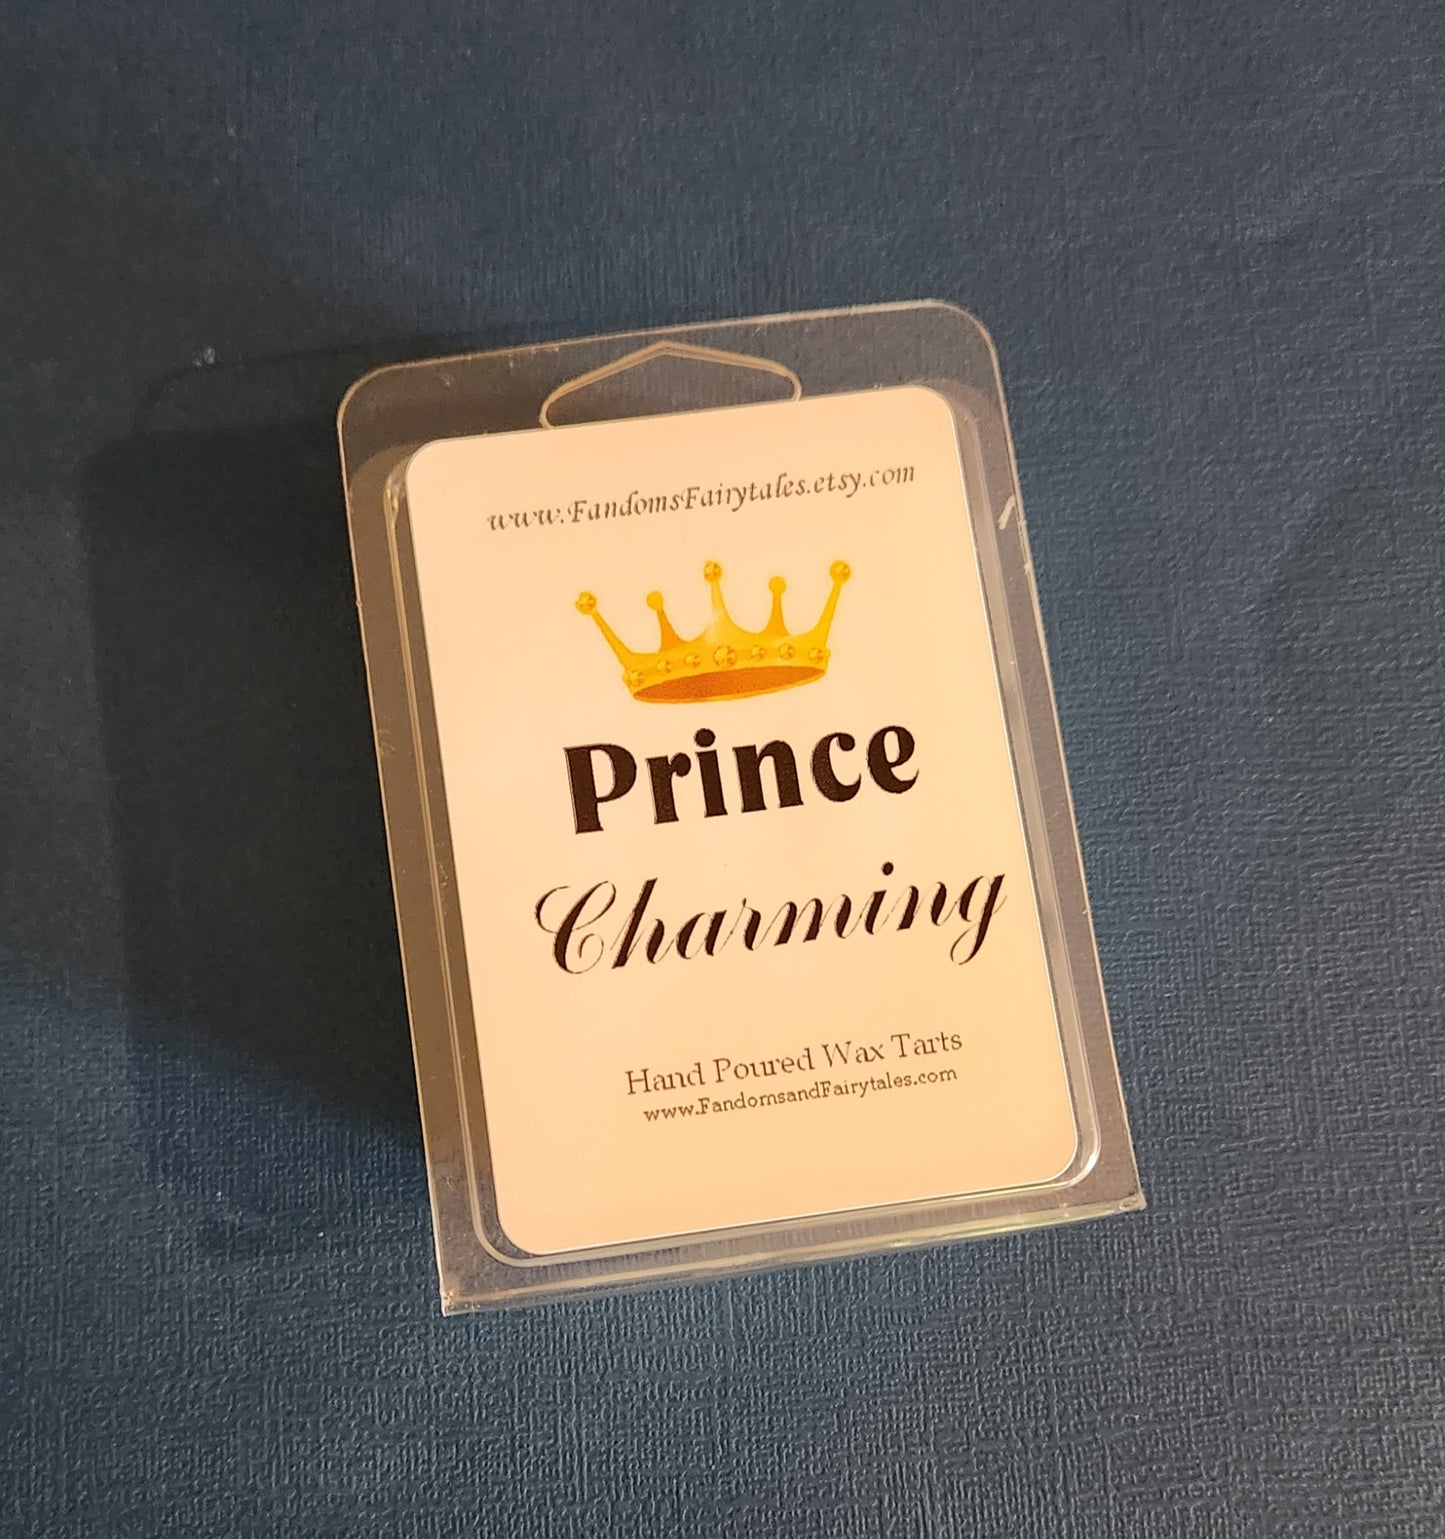 Prince Charming candles, wax melts or room spray